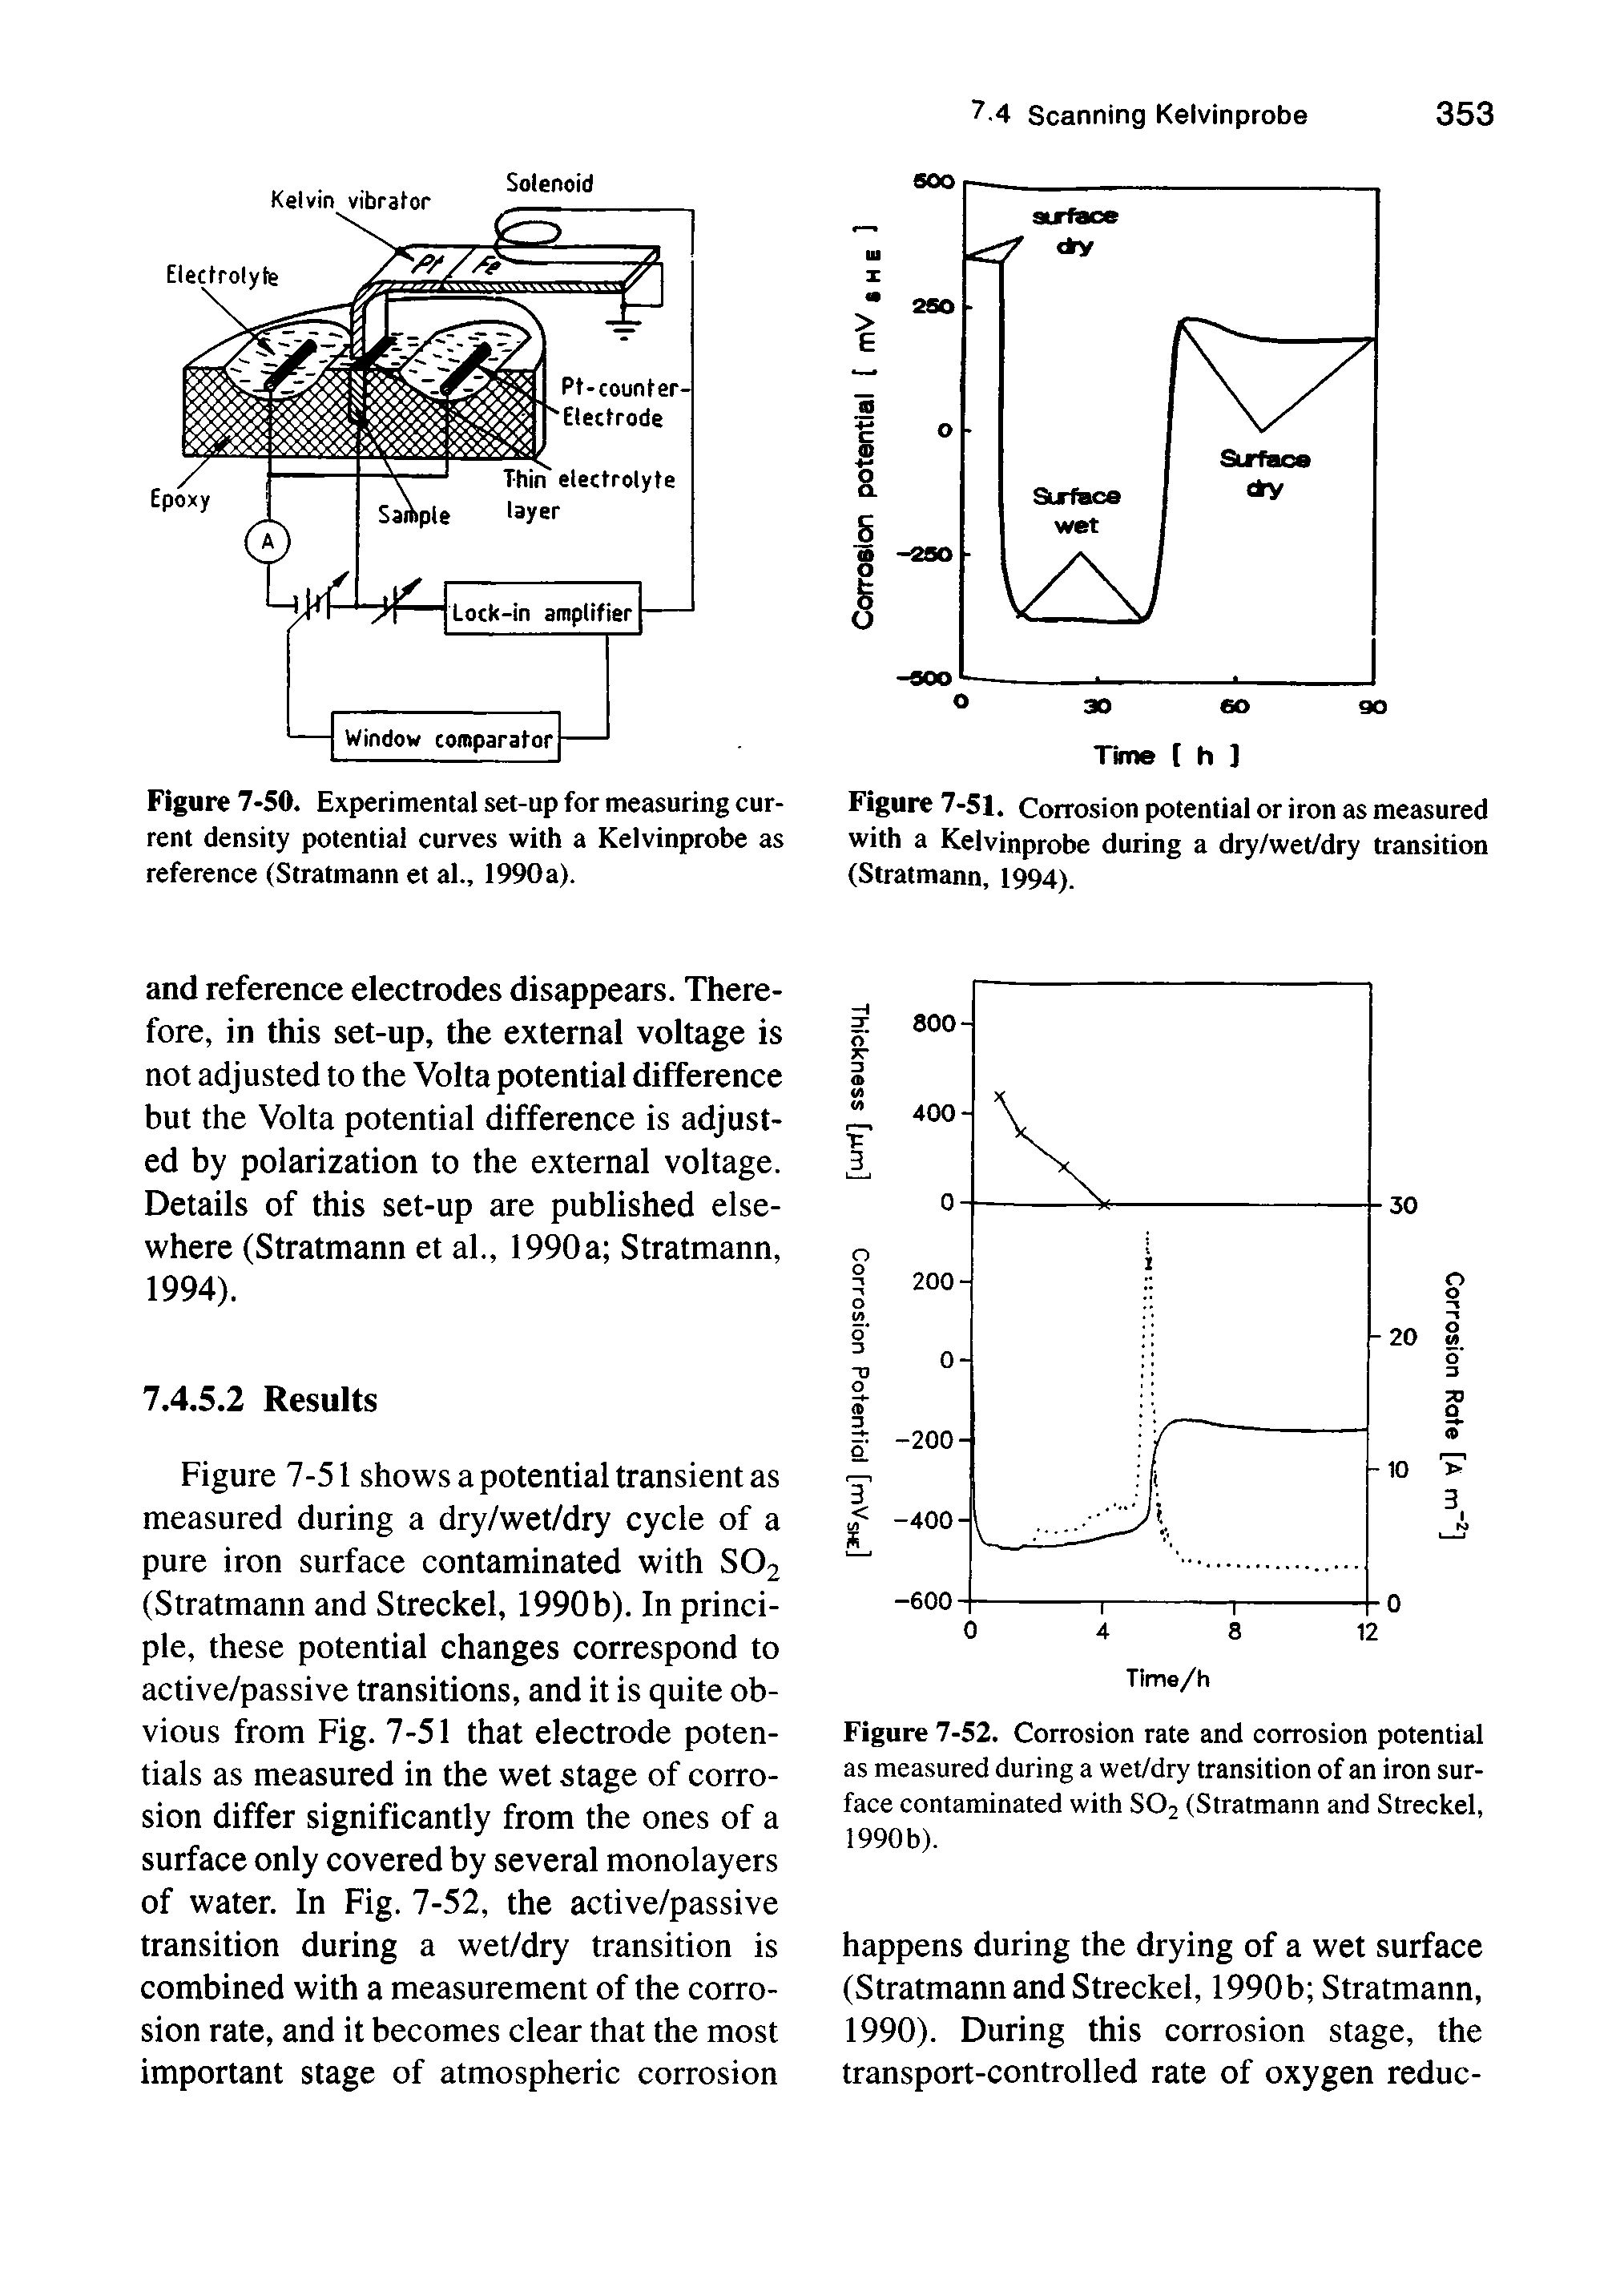 Figure 7-51. Corrosion potentiai or iron as measured with a Keivinprobe during a dry/wet/dry transition (Stratmann, 1994).